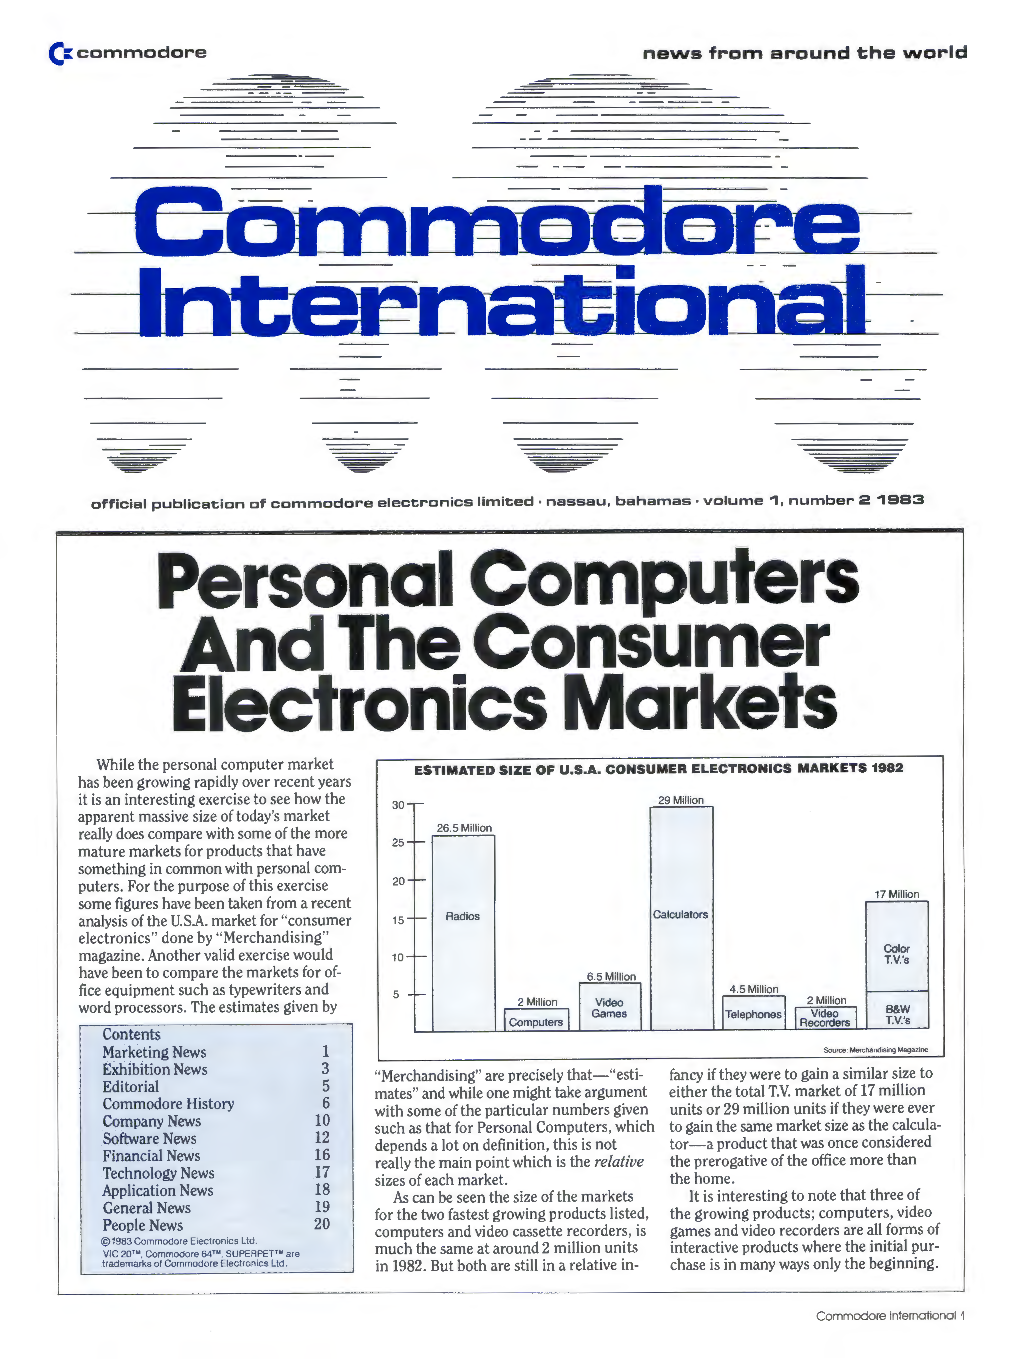 Personal Computers and the Consumer Electronics Markets